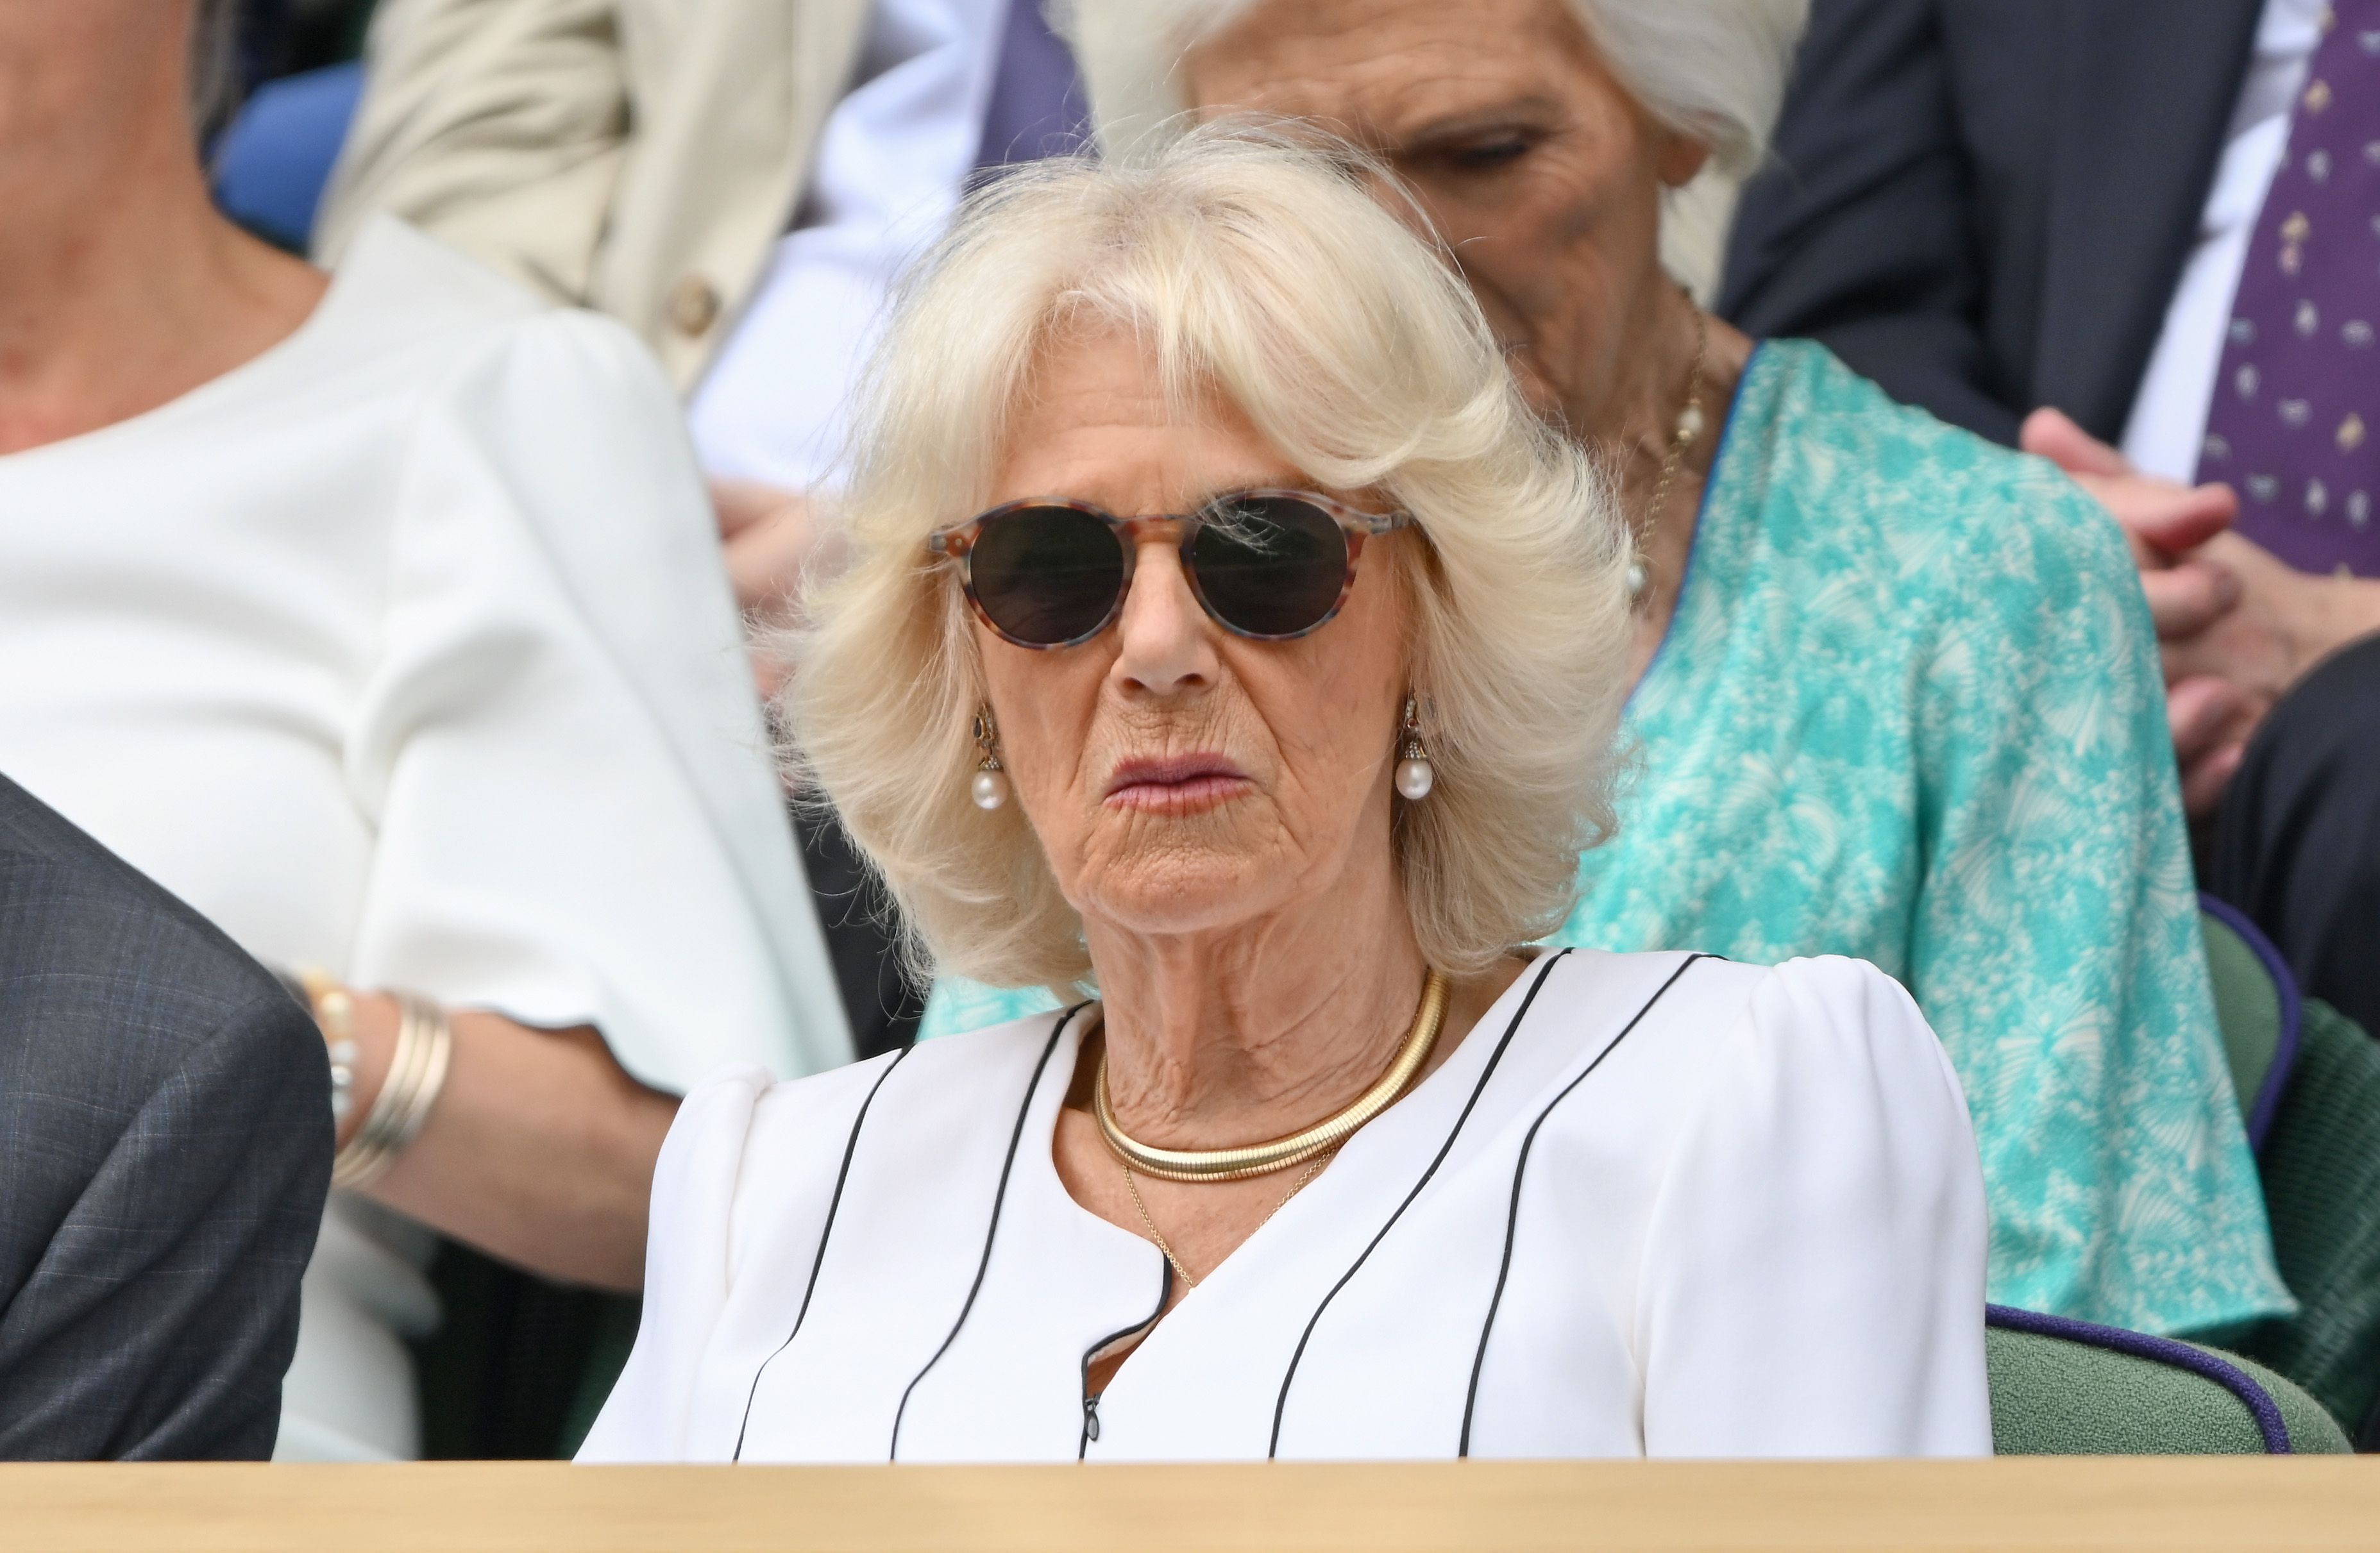 Why Didnt Tennis Players Curtsy to Queen Camilla at Wimbledon?